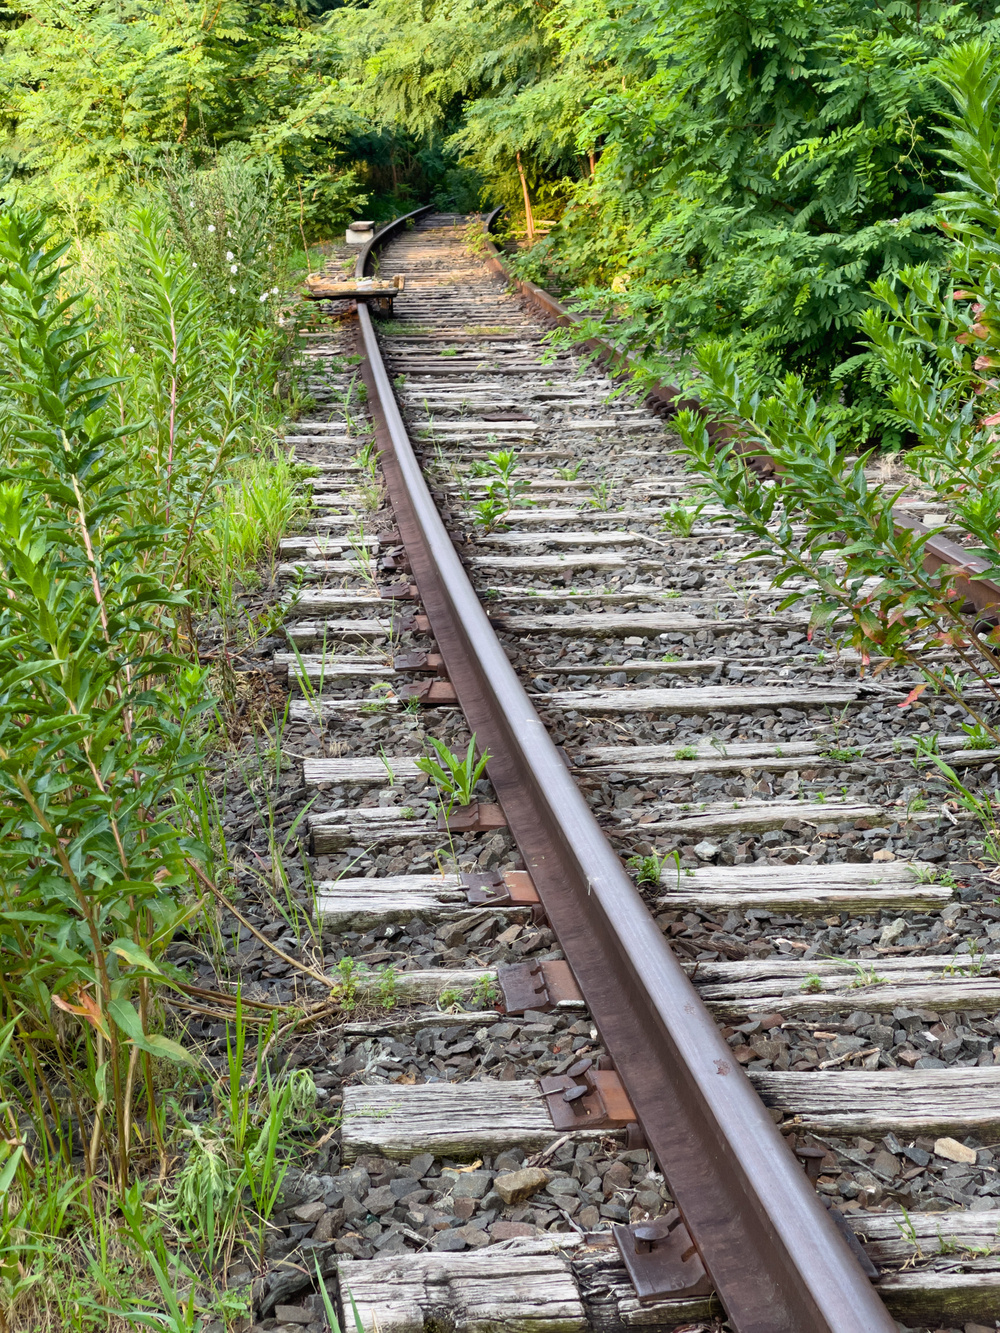 Train tracks disappearing into weed bushes and trees.